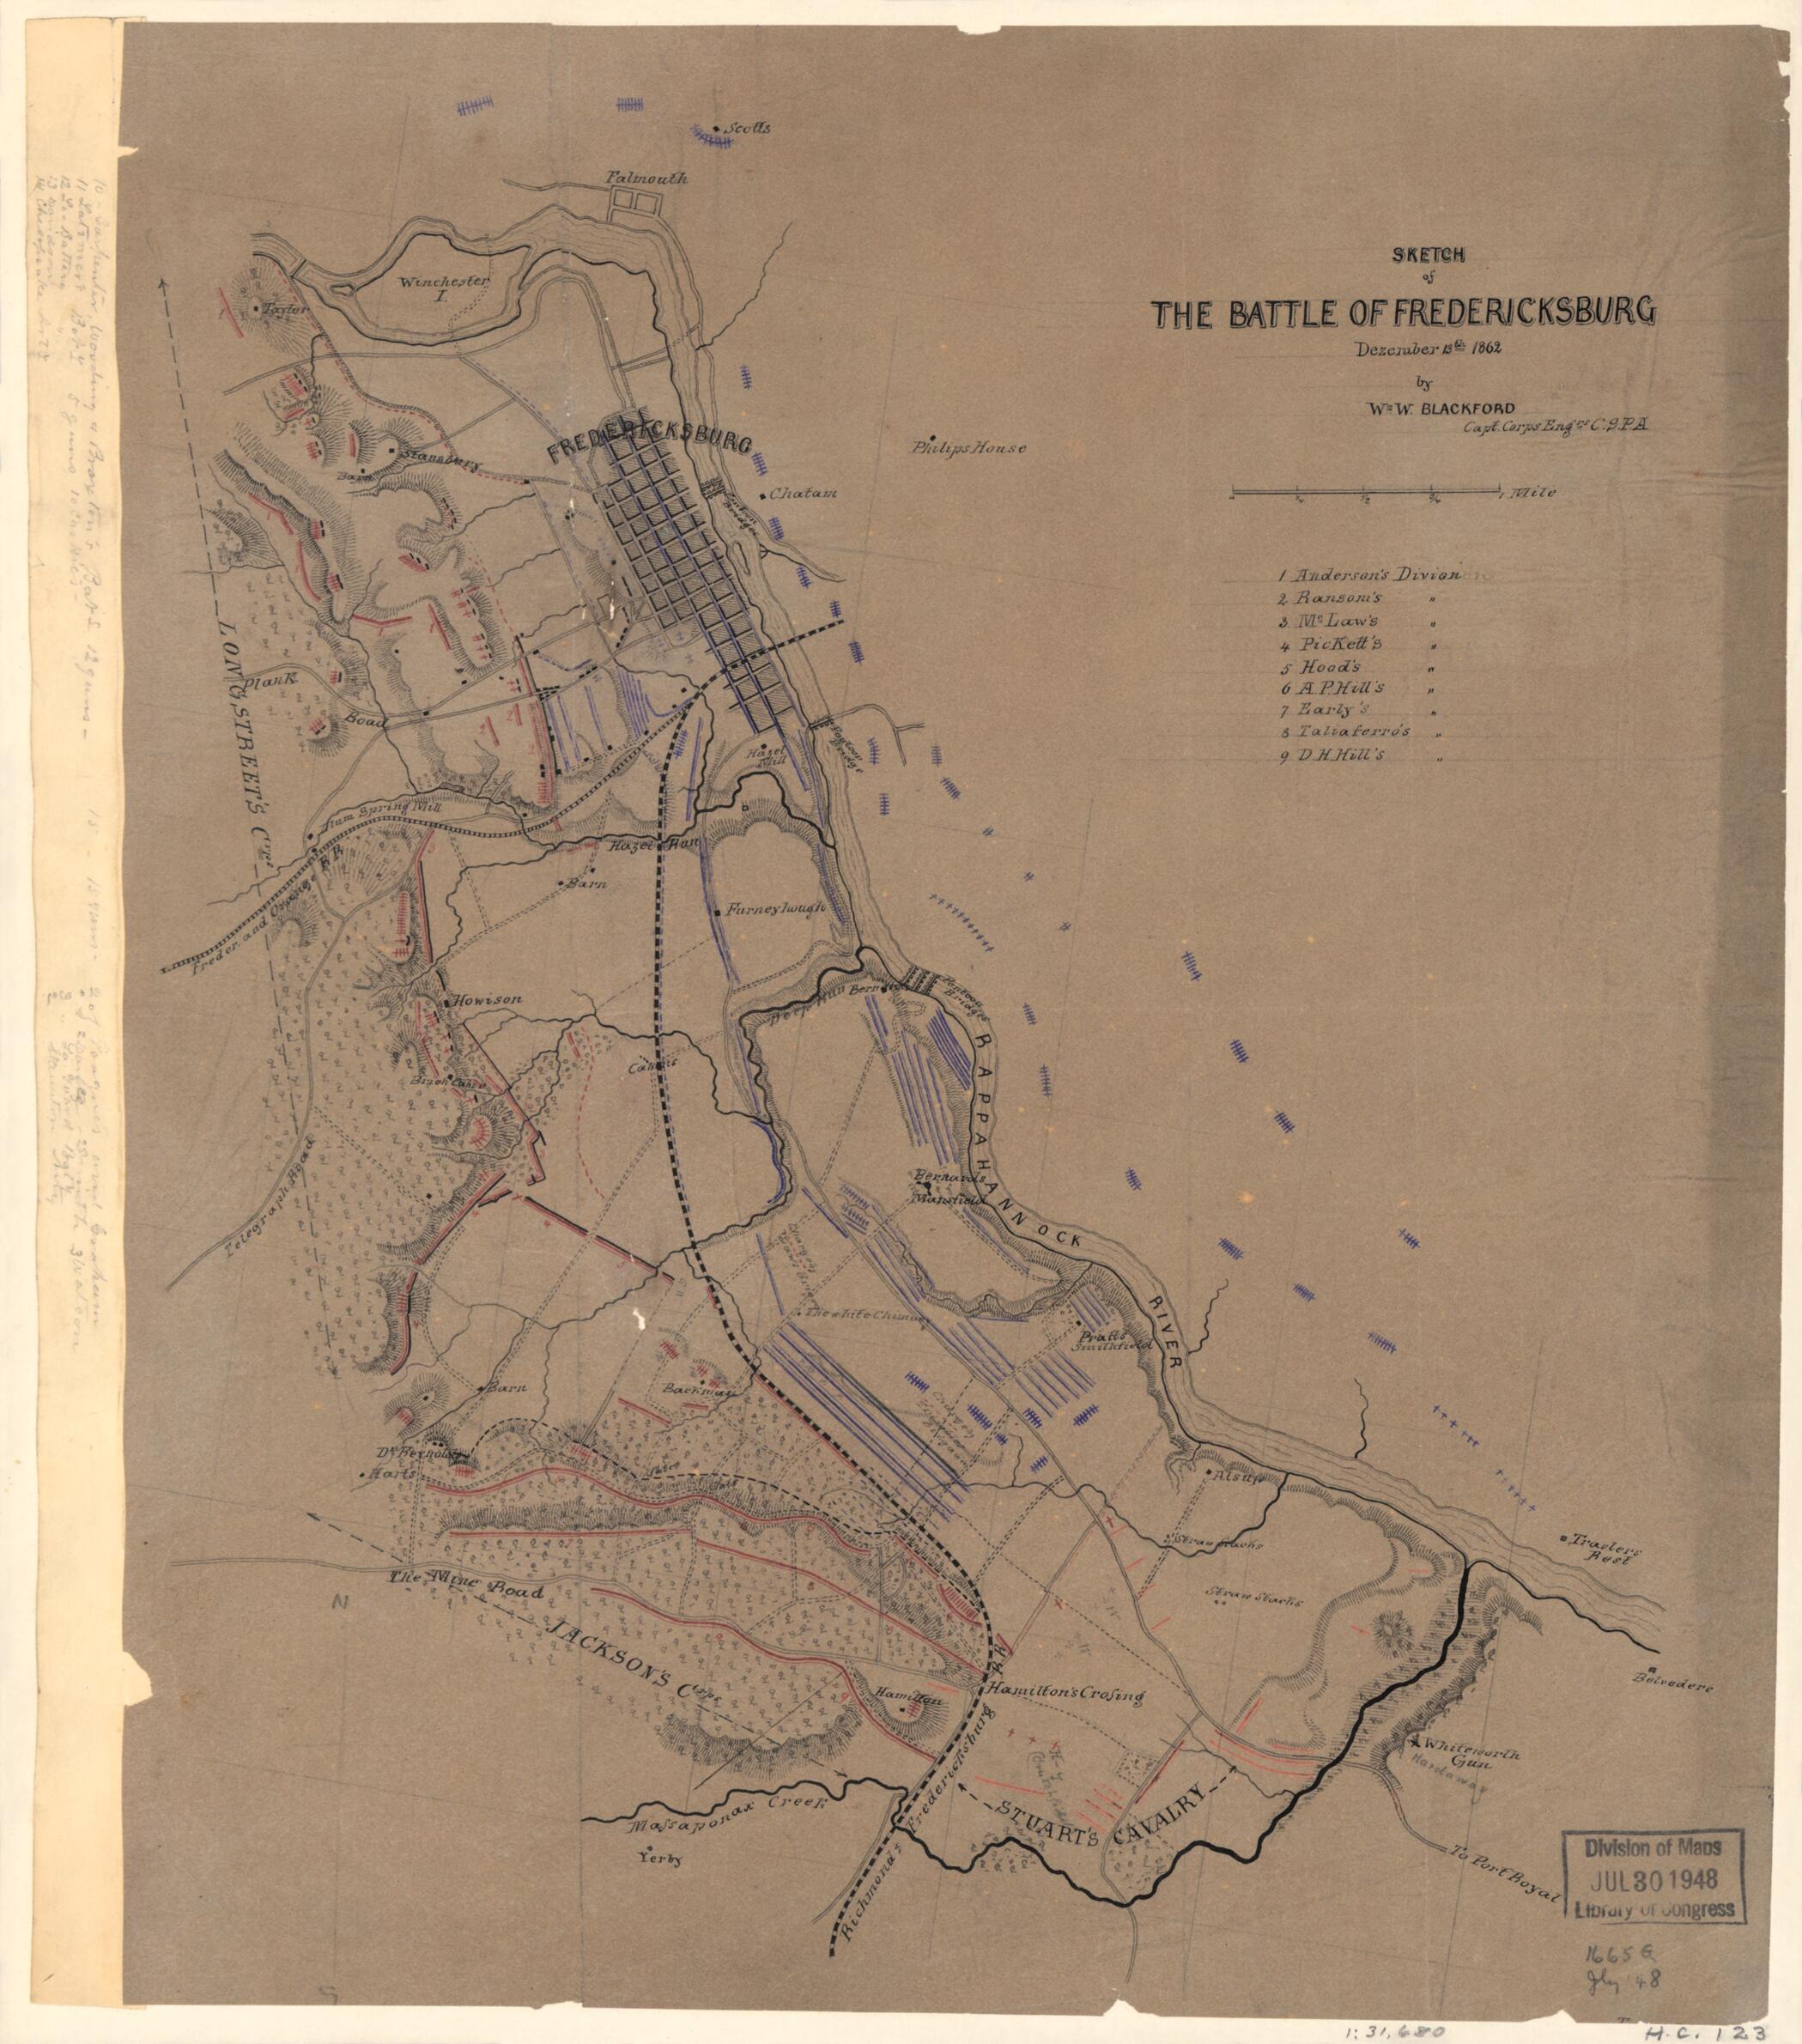 This old map of Sketch of the Battle of Fredericksburg, Dezember i.e. December 13th, from 1862 was created by W. W. (William Willis) Blackford in 1862